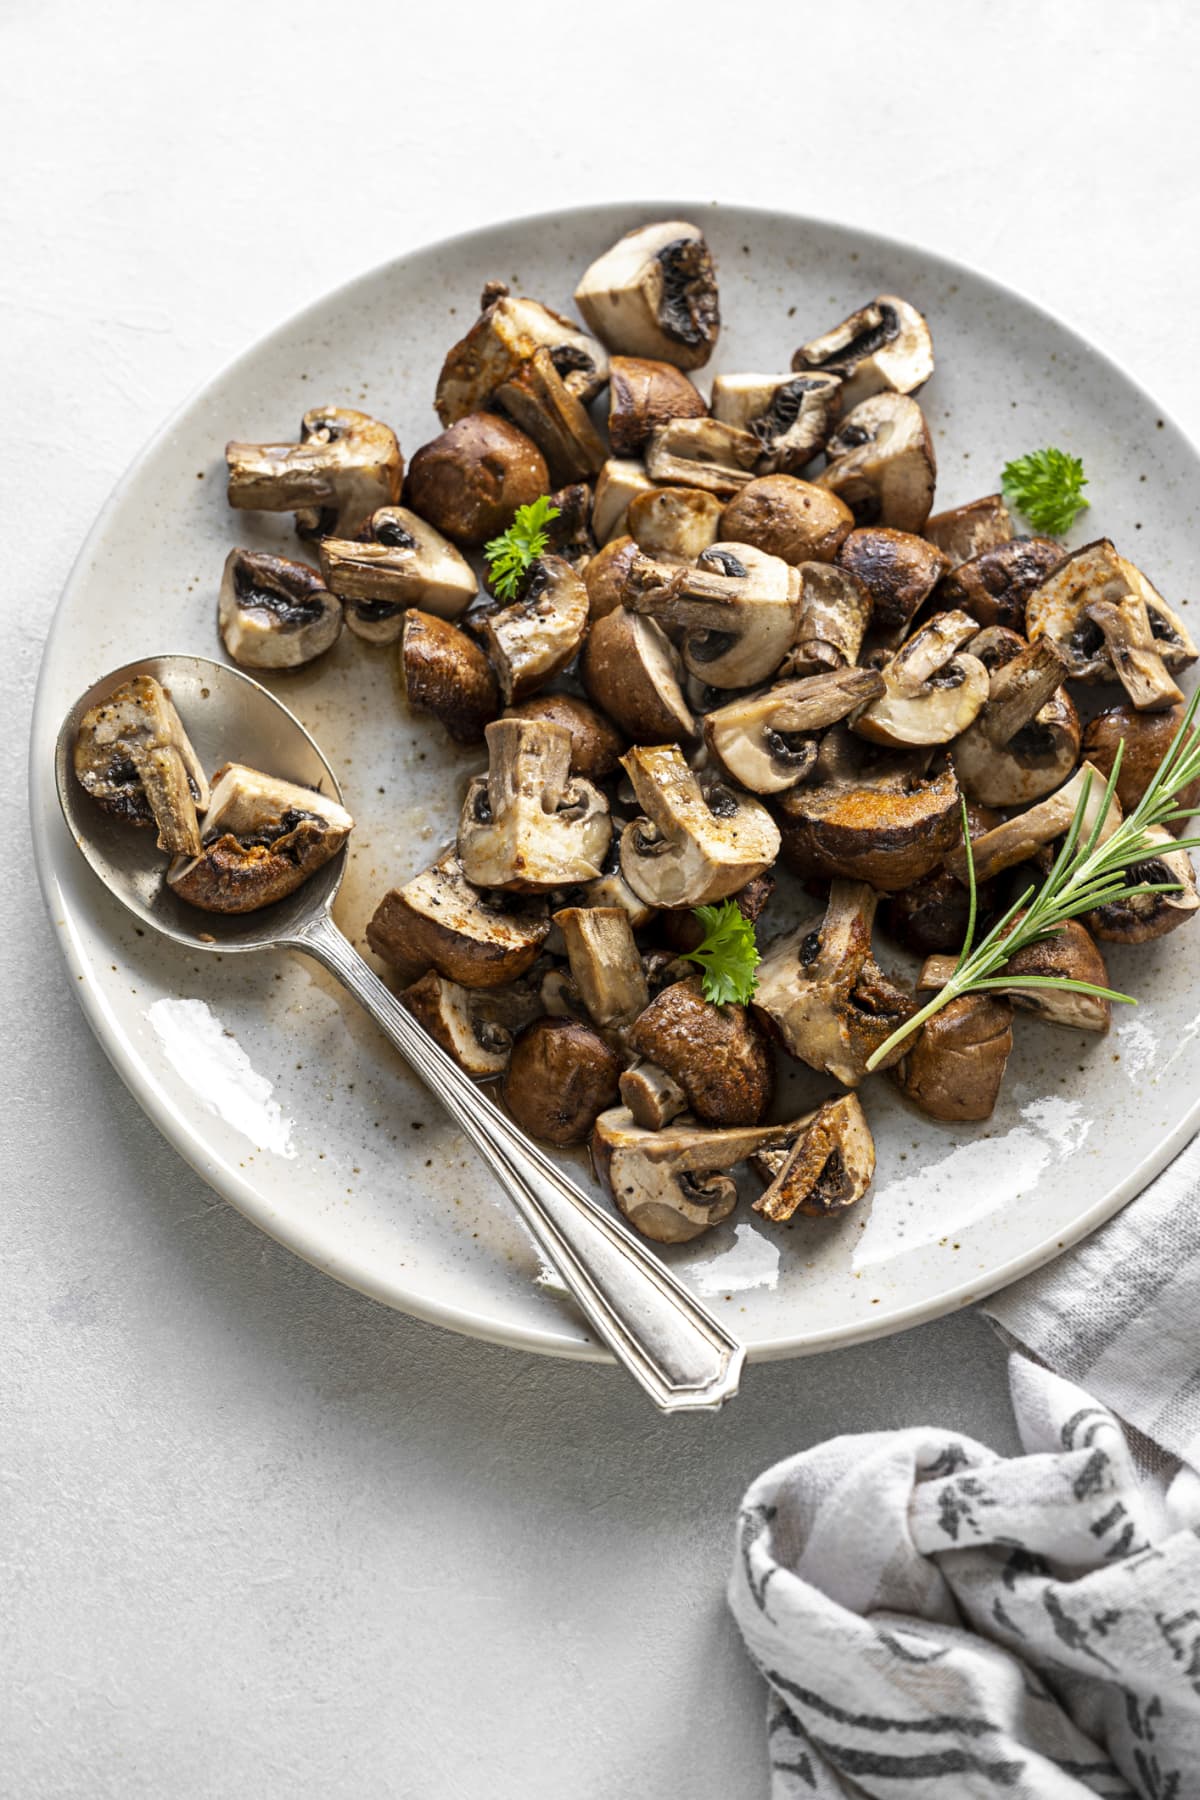 Baked mushrooms on white plate with seasonings and green garnish and silver spoon